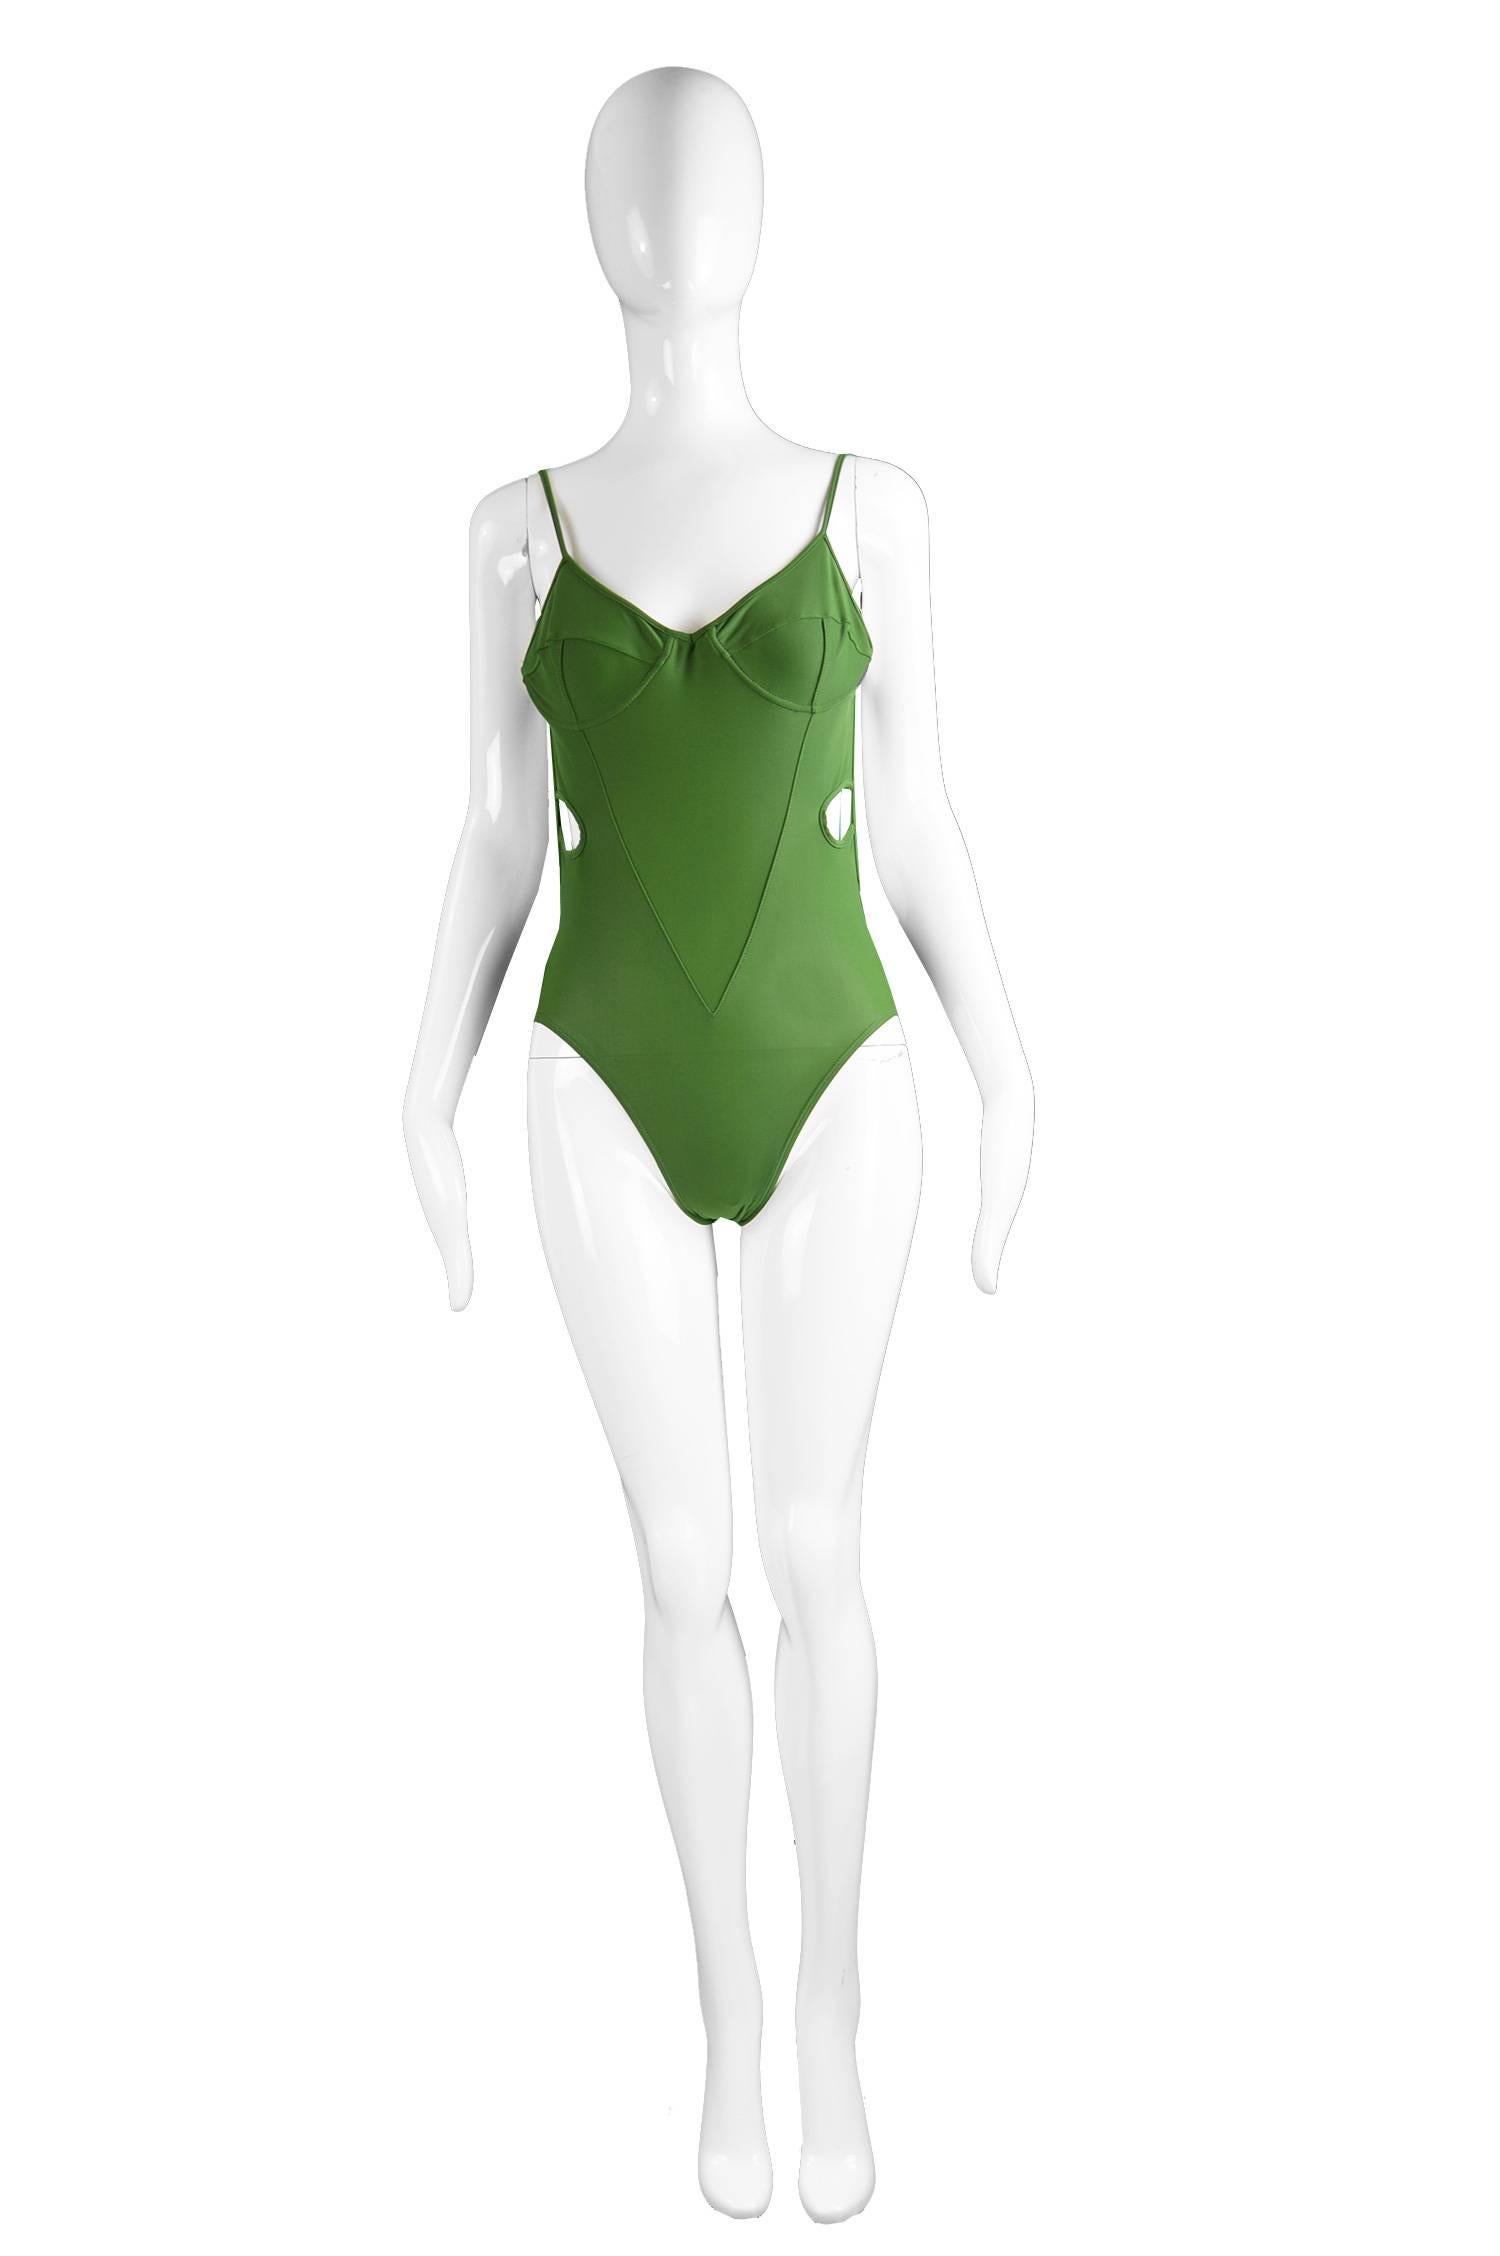 Early John Galliano London Green Cut Out Swimsuit Made in Britain, 1980s

Size: Marked US 8 / UK 10 / EU 36 / Hips 35” / 89cm

Condition: Excellent Vintage Condition - No noticeable stains, tears or holes.

A rare vintage bathing suit by John